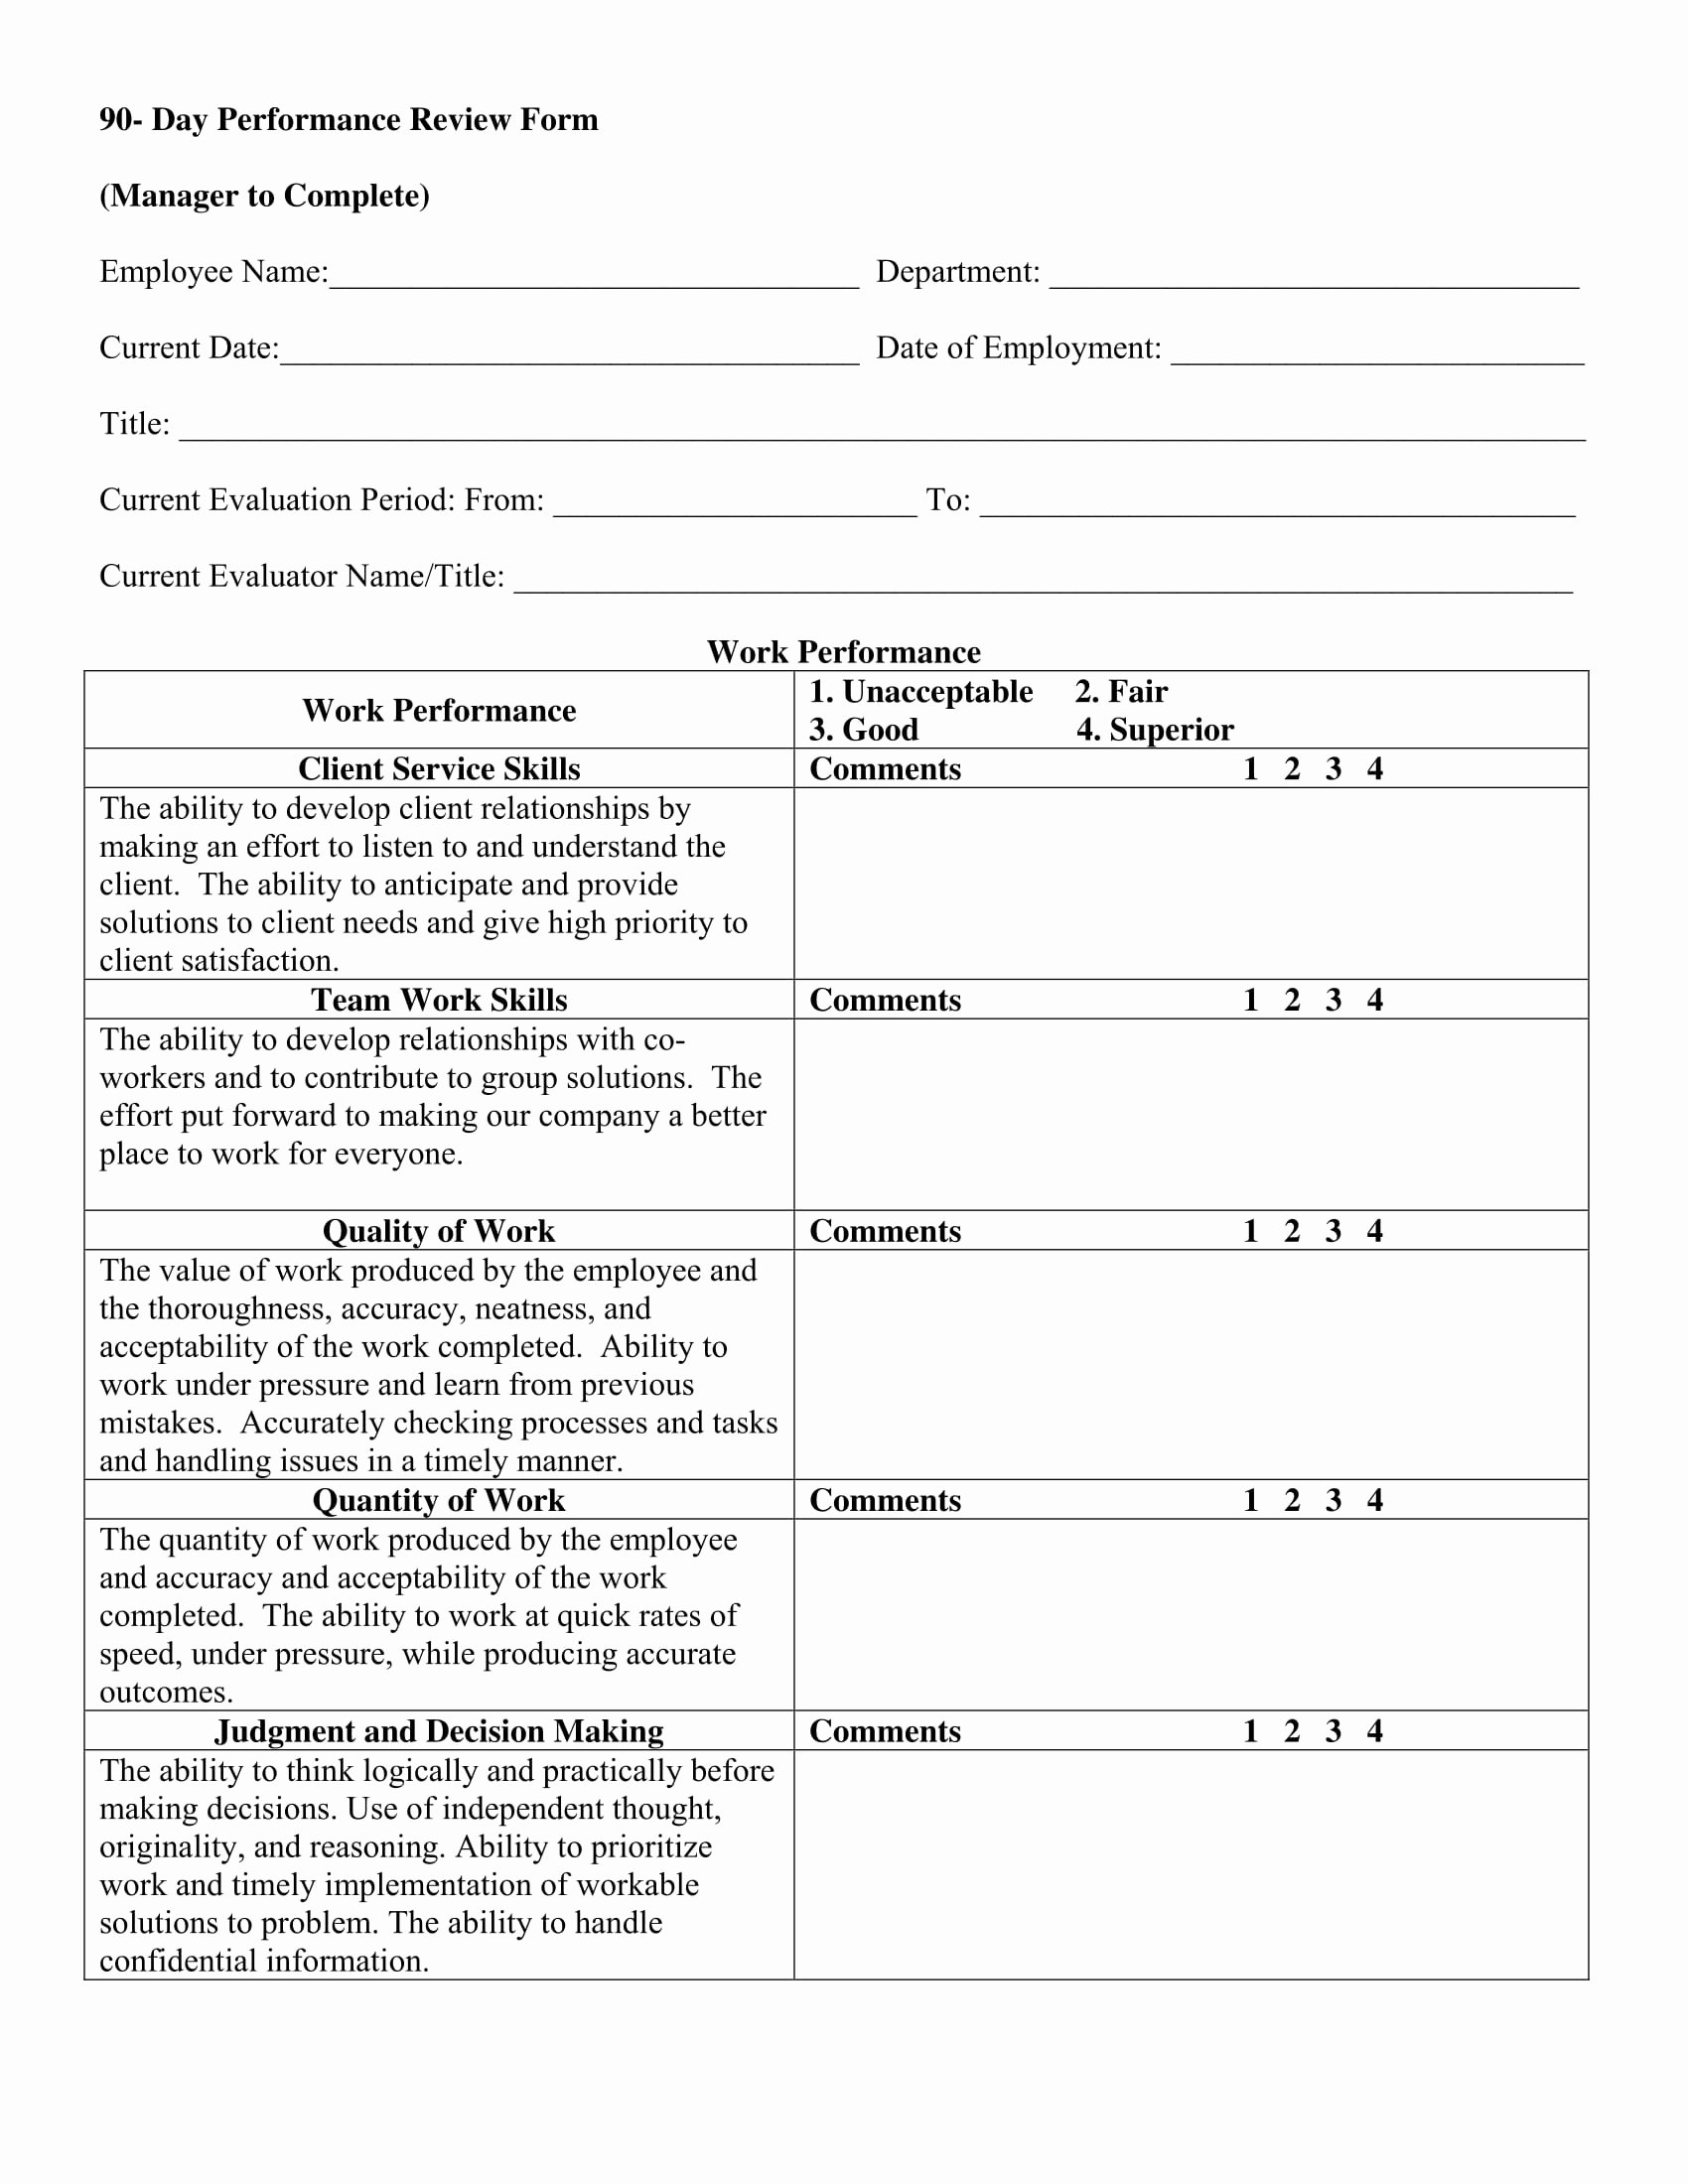 90 Day Probationary Period Template New Free 14 90 Day Review forms In Pdf